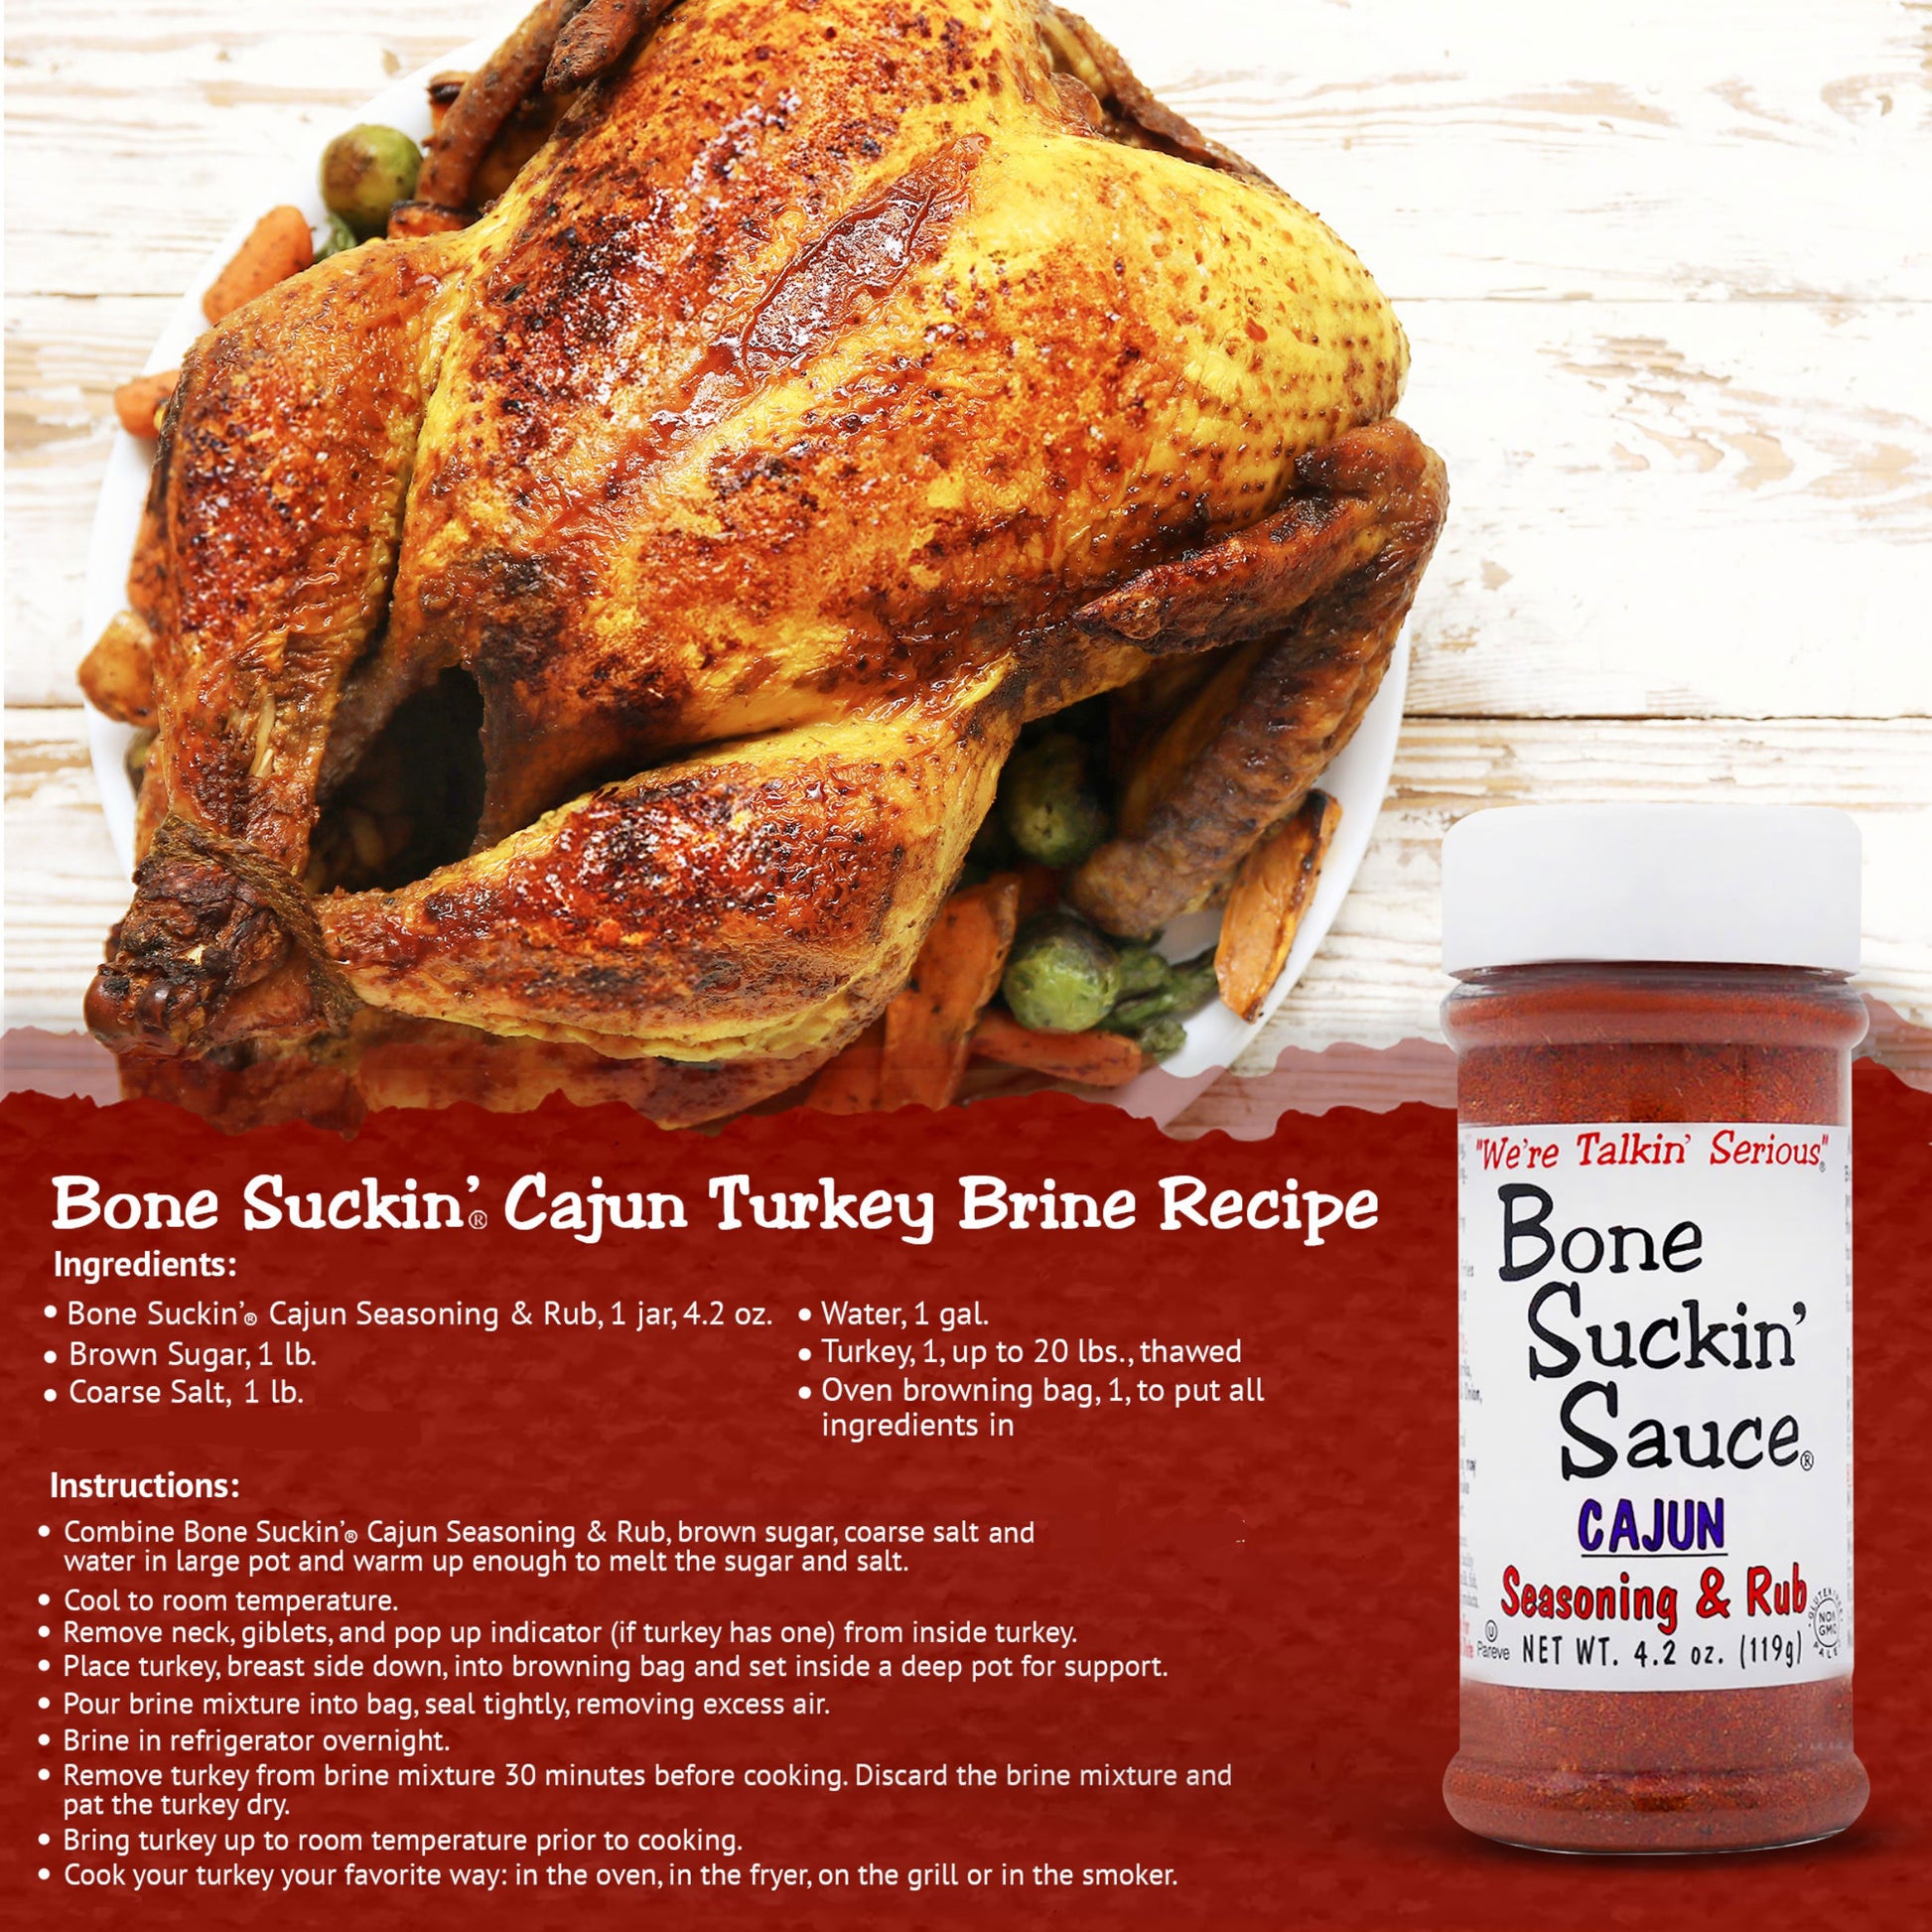 Bone Suckin' Cajun Turkey Brine Recipe. Ingredients: Bone Suckin' Cajun Seasoning & Rub, 1 jar. 1lb brown sugar. 1lb coarse salt. 1 gal. water. 1 thawed turkey <20 lbs. 1 oven browning bag. Instructions: Combine Bone Suckin' Cajun Seasoning & Rub, brown sugar, salt, and water in large pot. Warm up enough to melt then cool to room temp. Remove neck and giblets. Place turkey breast side down into browning bag, seal tightly. Brine in fridge overnight. Remove turkey from brine 30 min before cooking